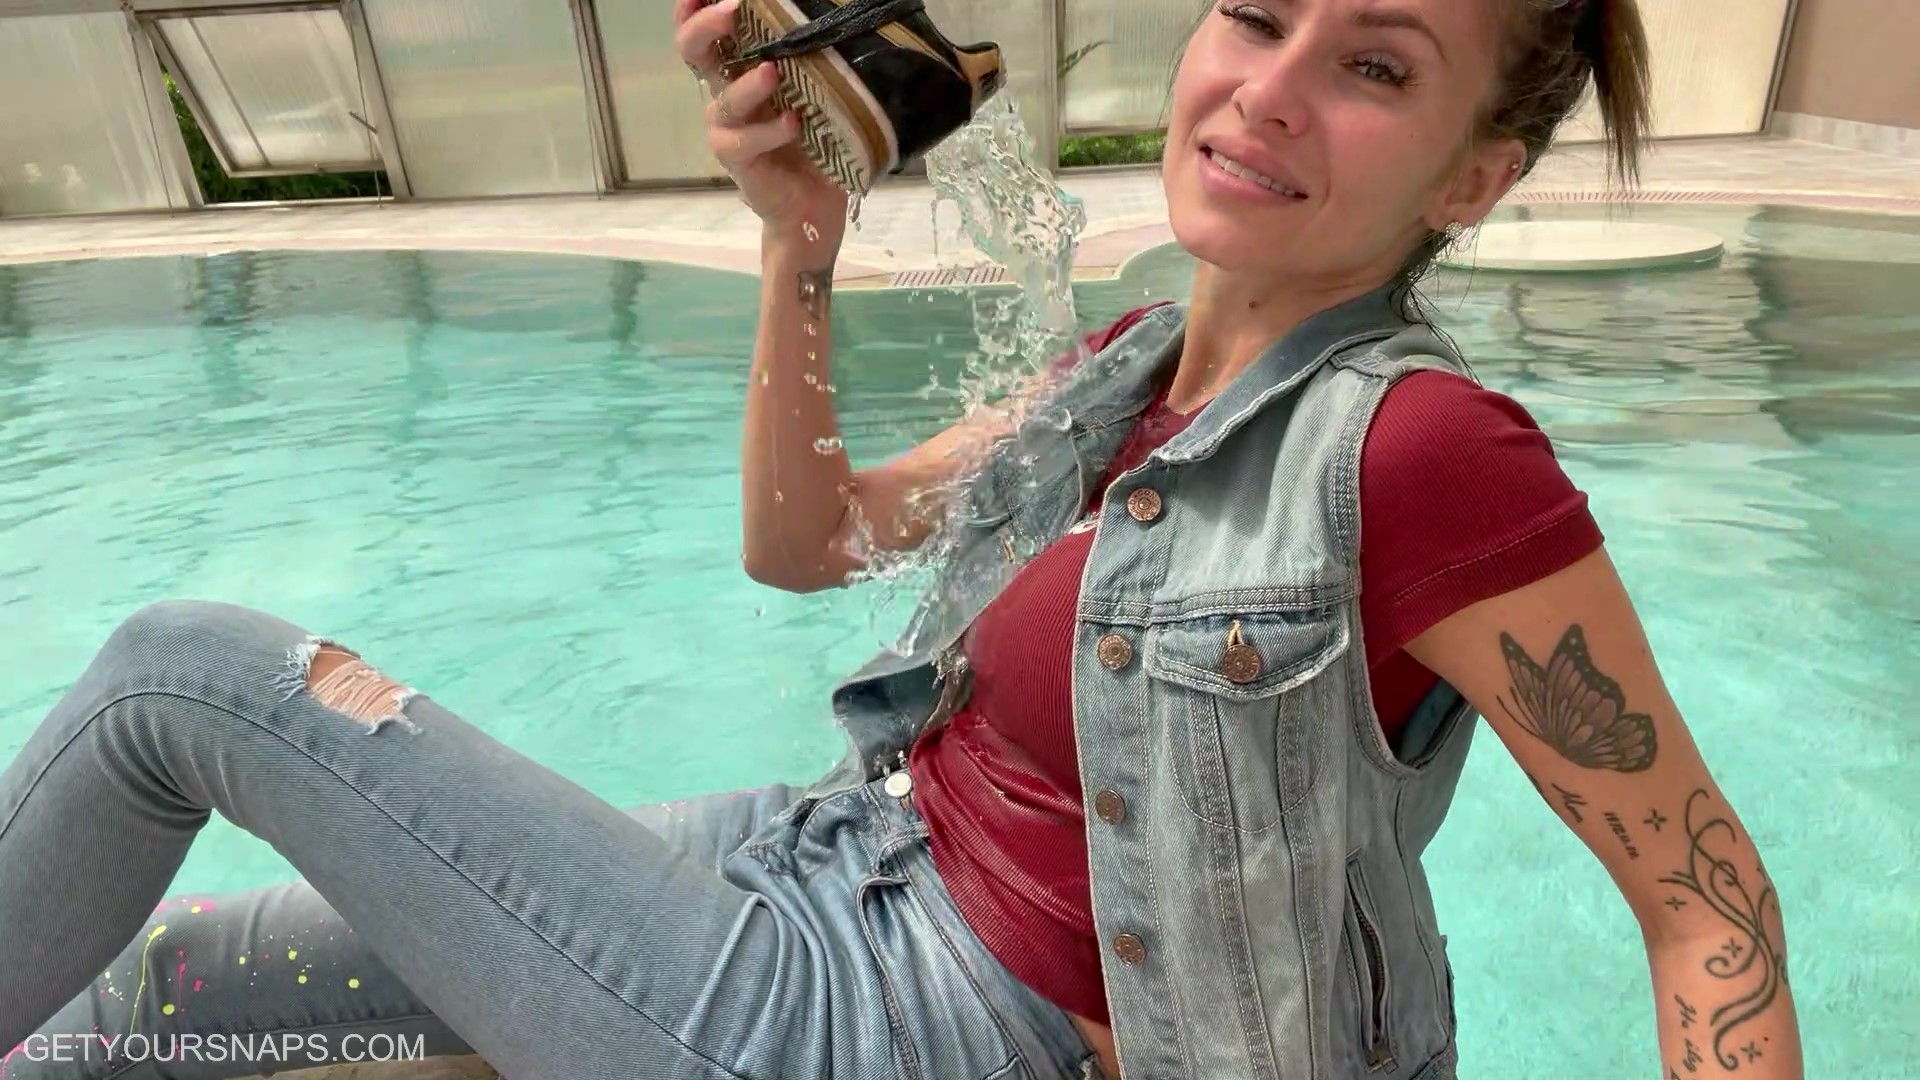 Olga gets wet in the pool in jeans - frame at 8m8s